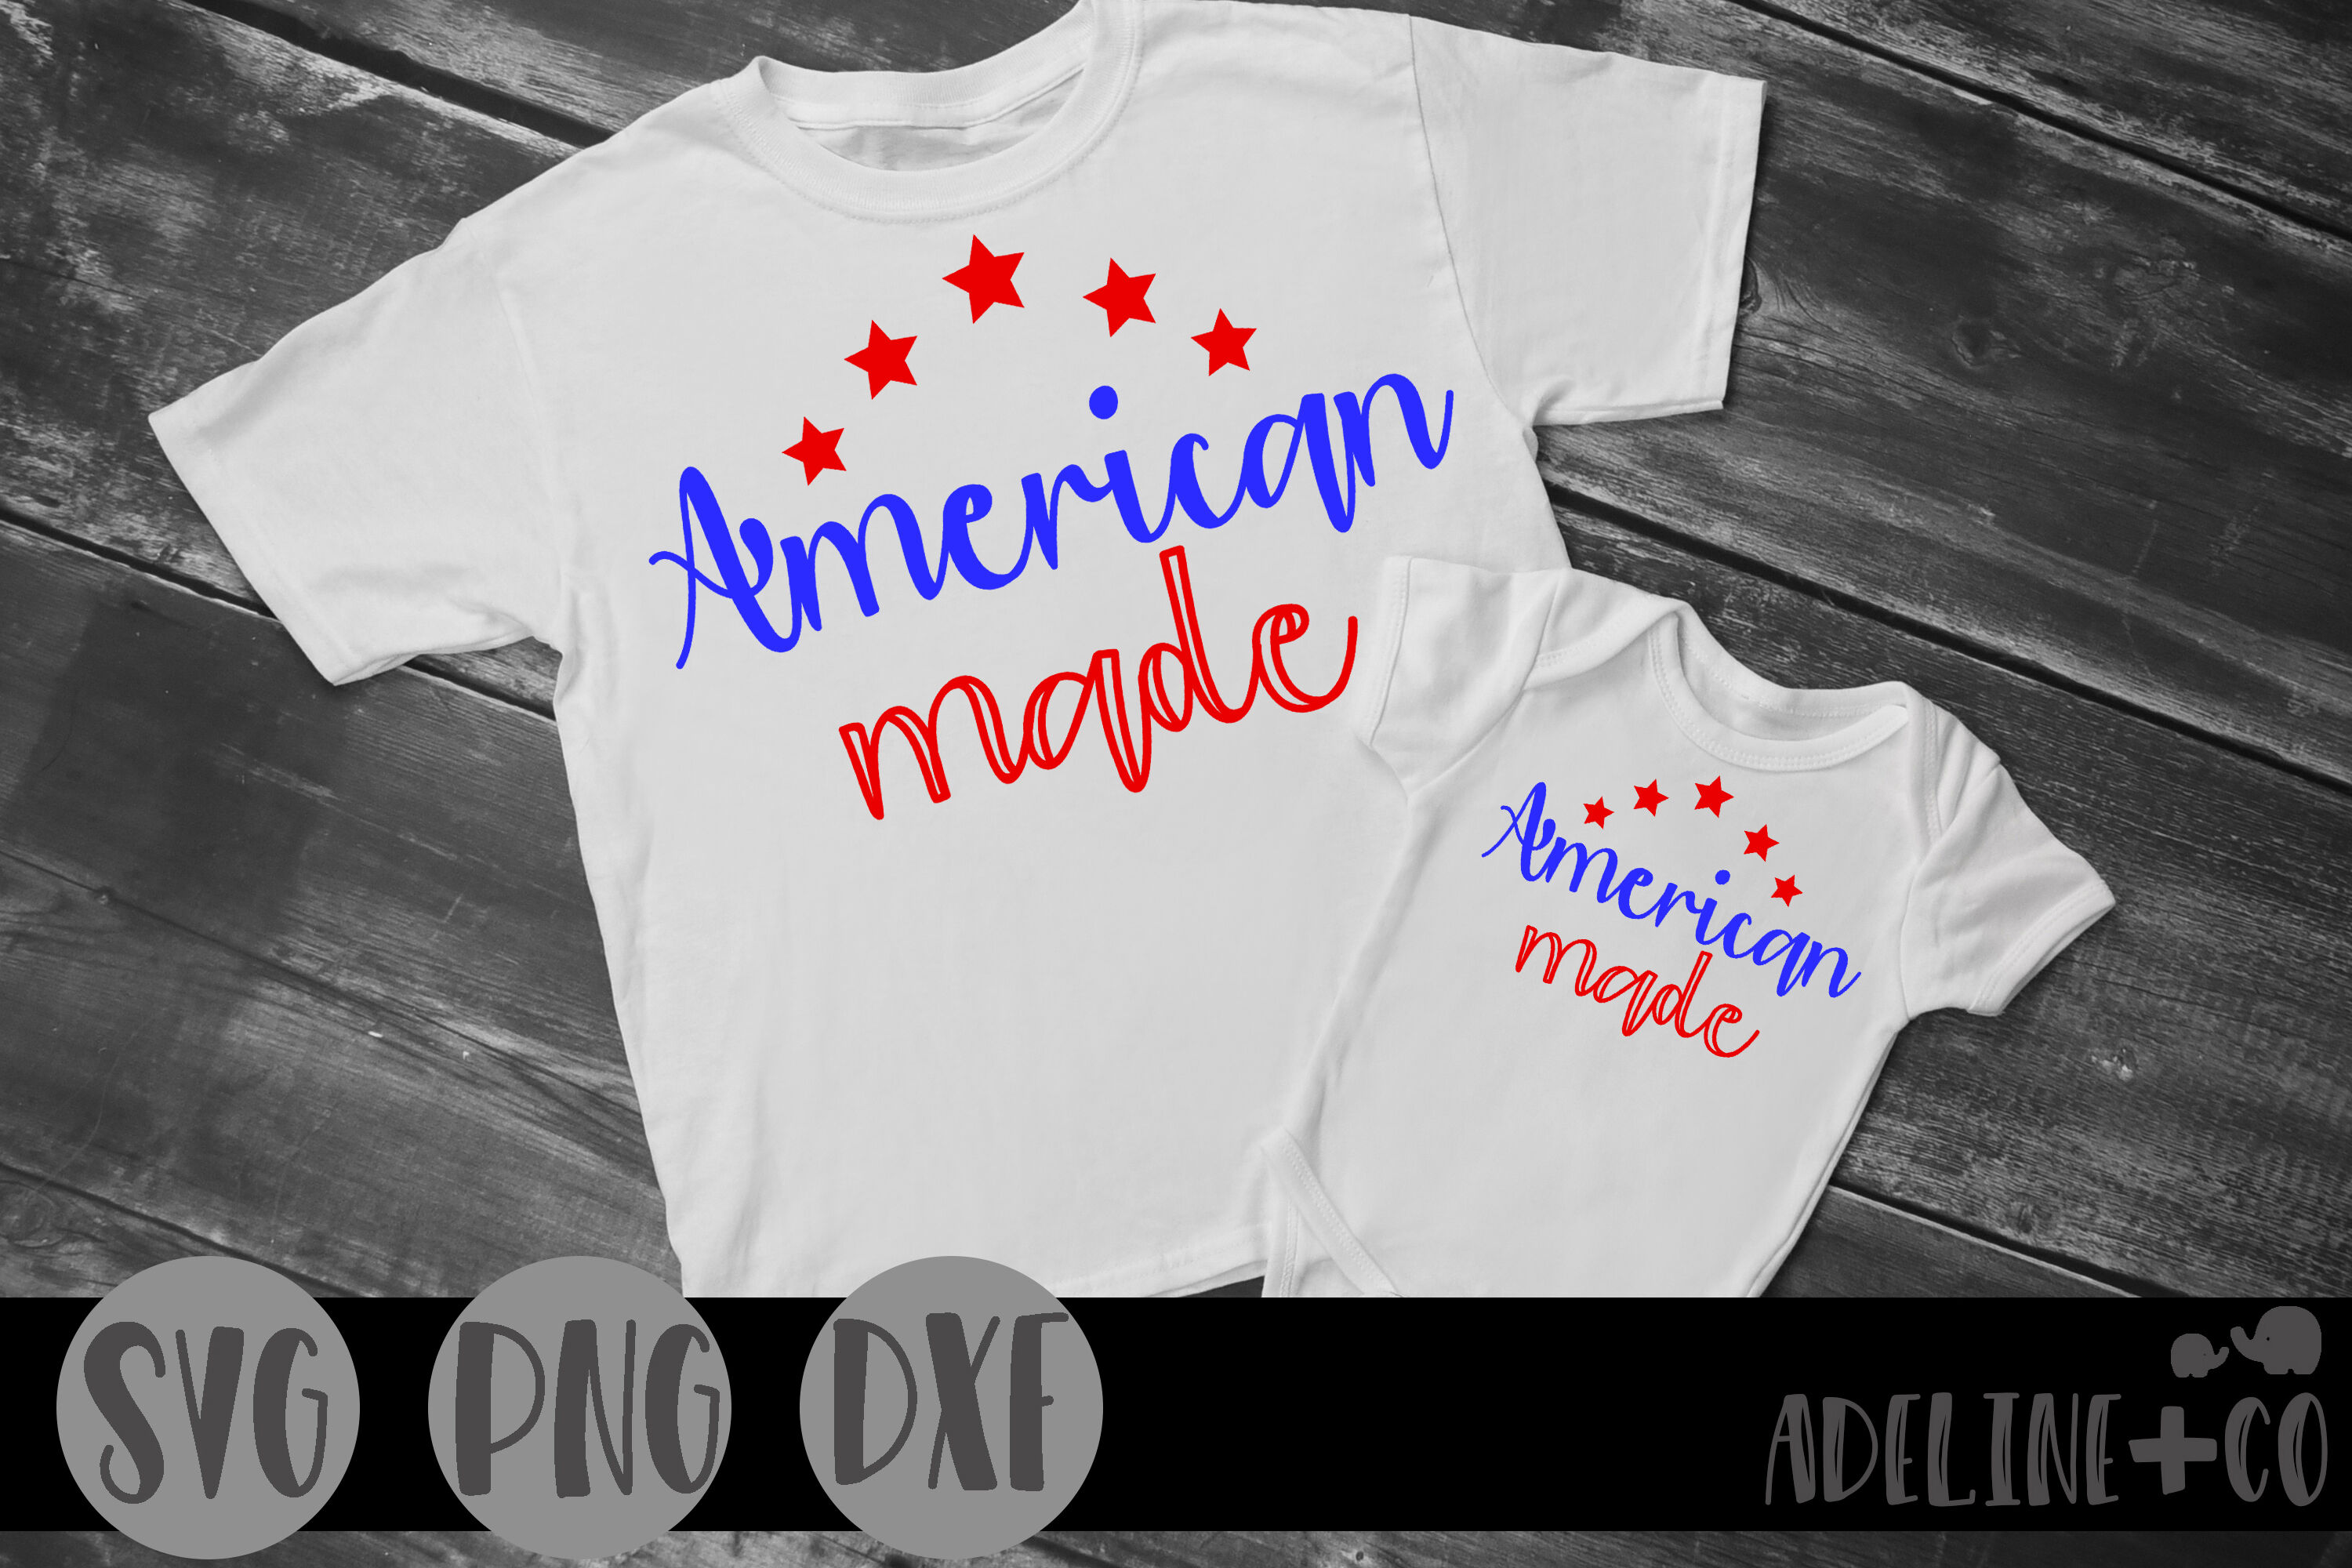 American made SVG, PNG, DXF By Adeline&co | TheHungryJPEG